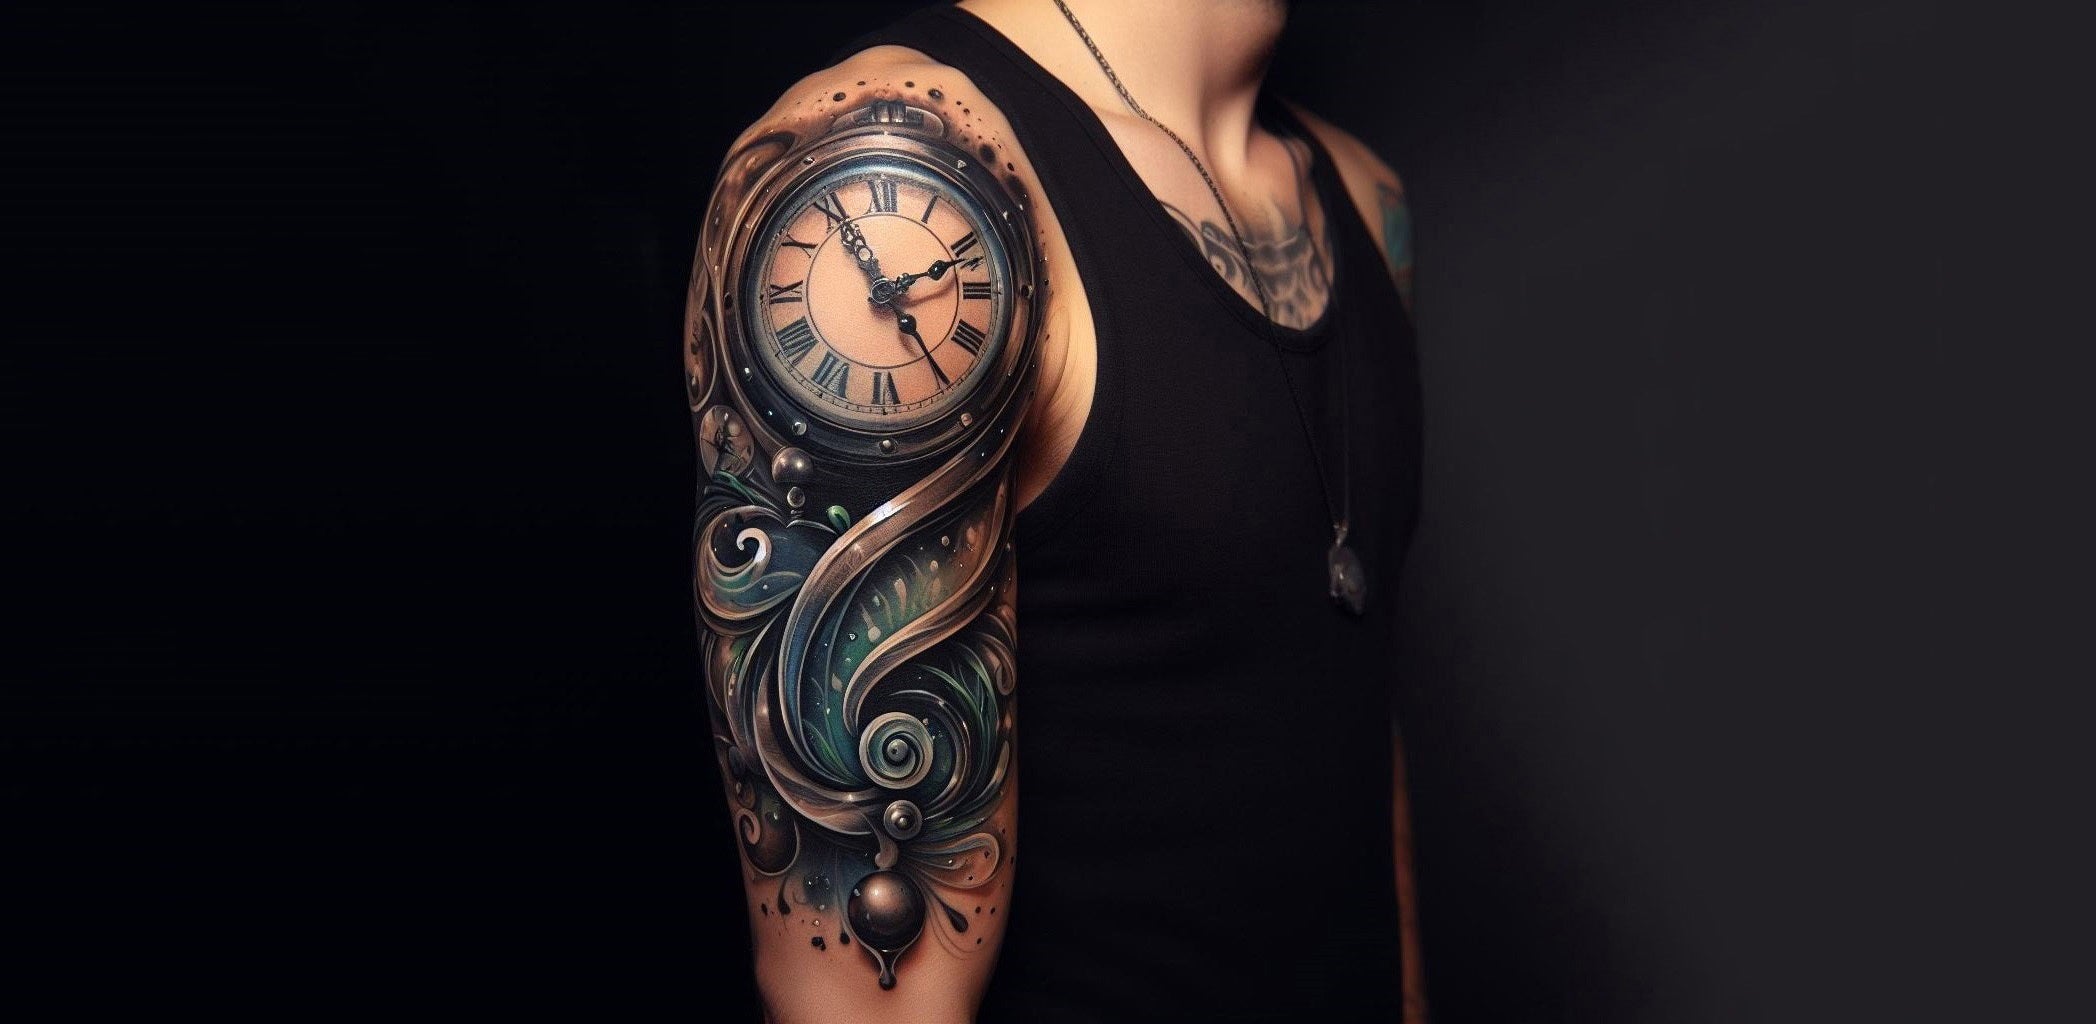 Tattoo uploaded by Diego Ribba • Gear and a wrench • Tattoodo